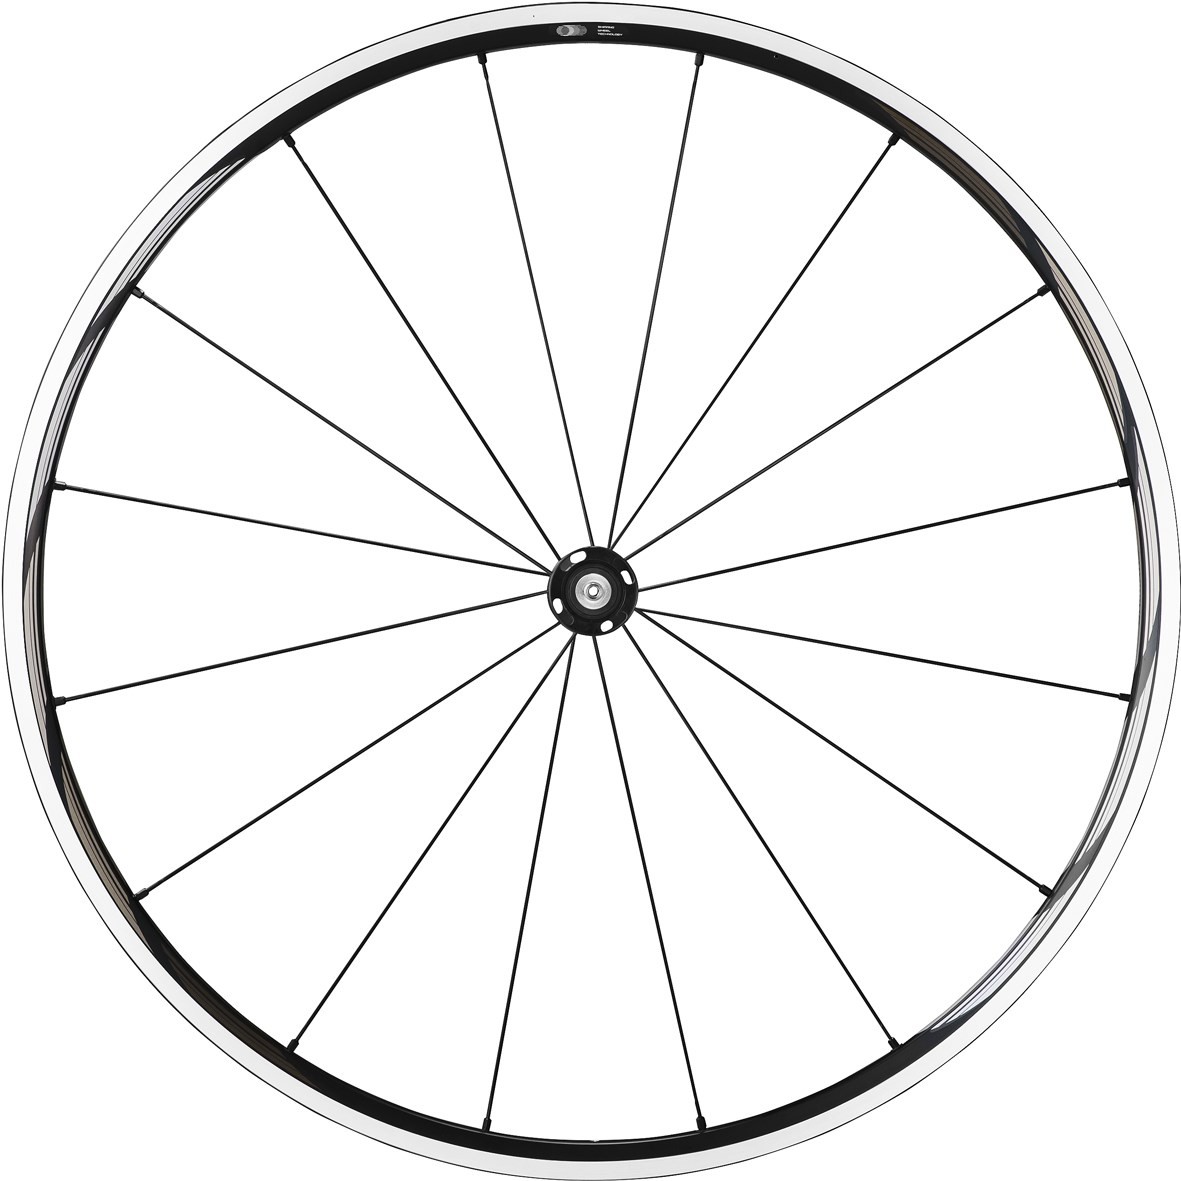 Shimano WH-RS610-TL Wheel - Tubeless Ready Clincher 24 mm - Black - Front